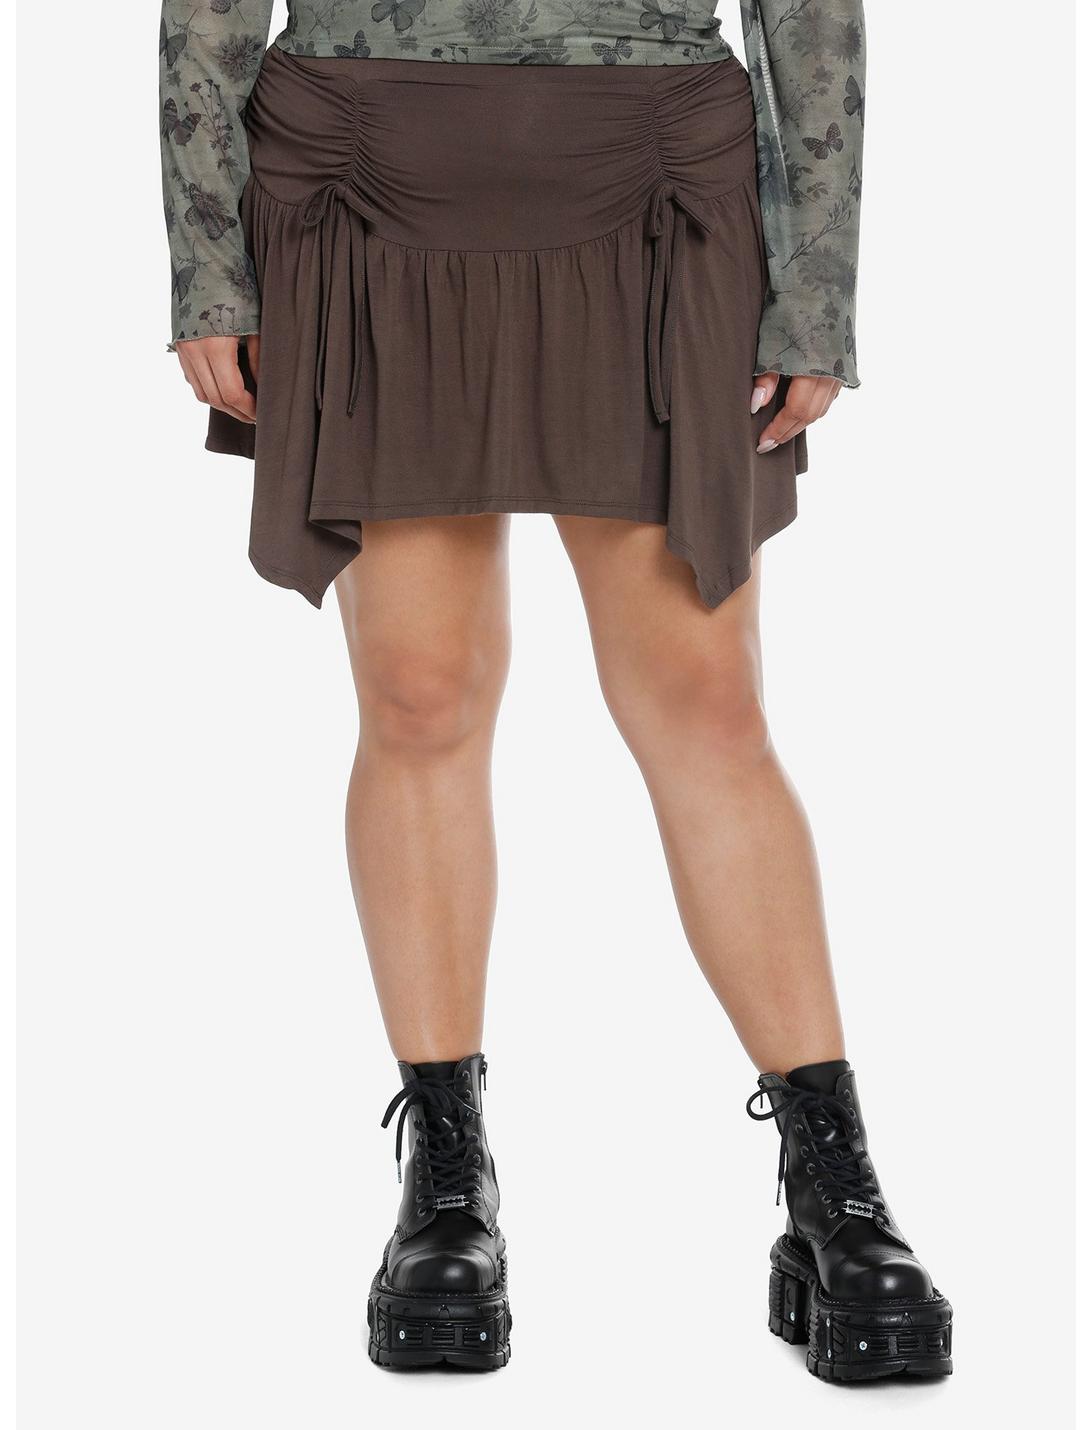 Thorn & Fable Grey Ruched Front Mini Skirt Plus Size, GREY, hi-res